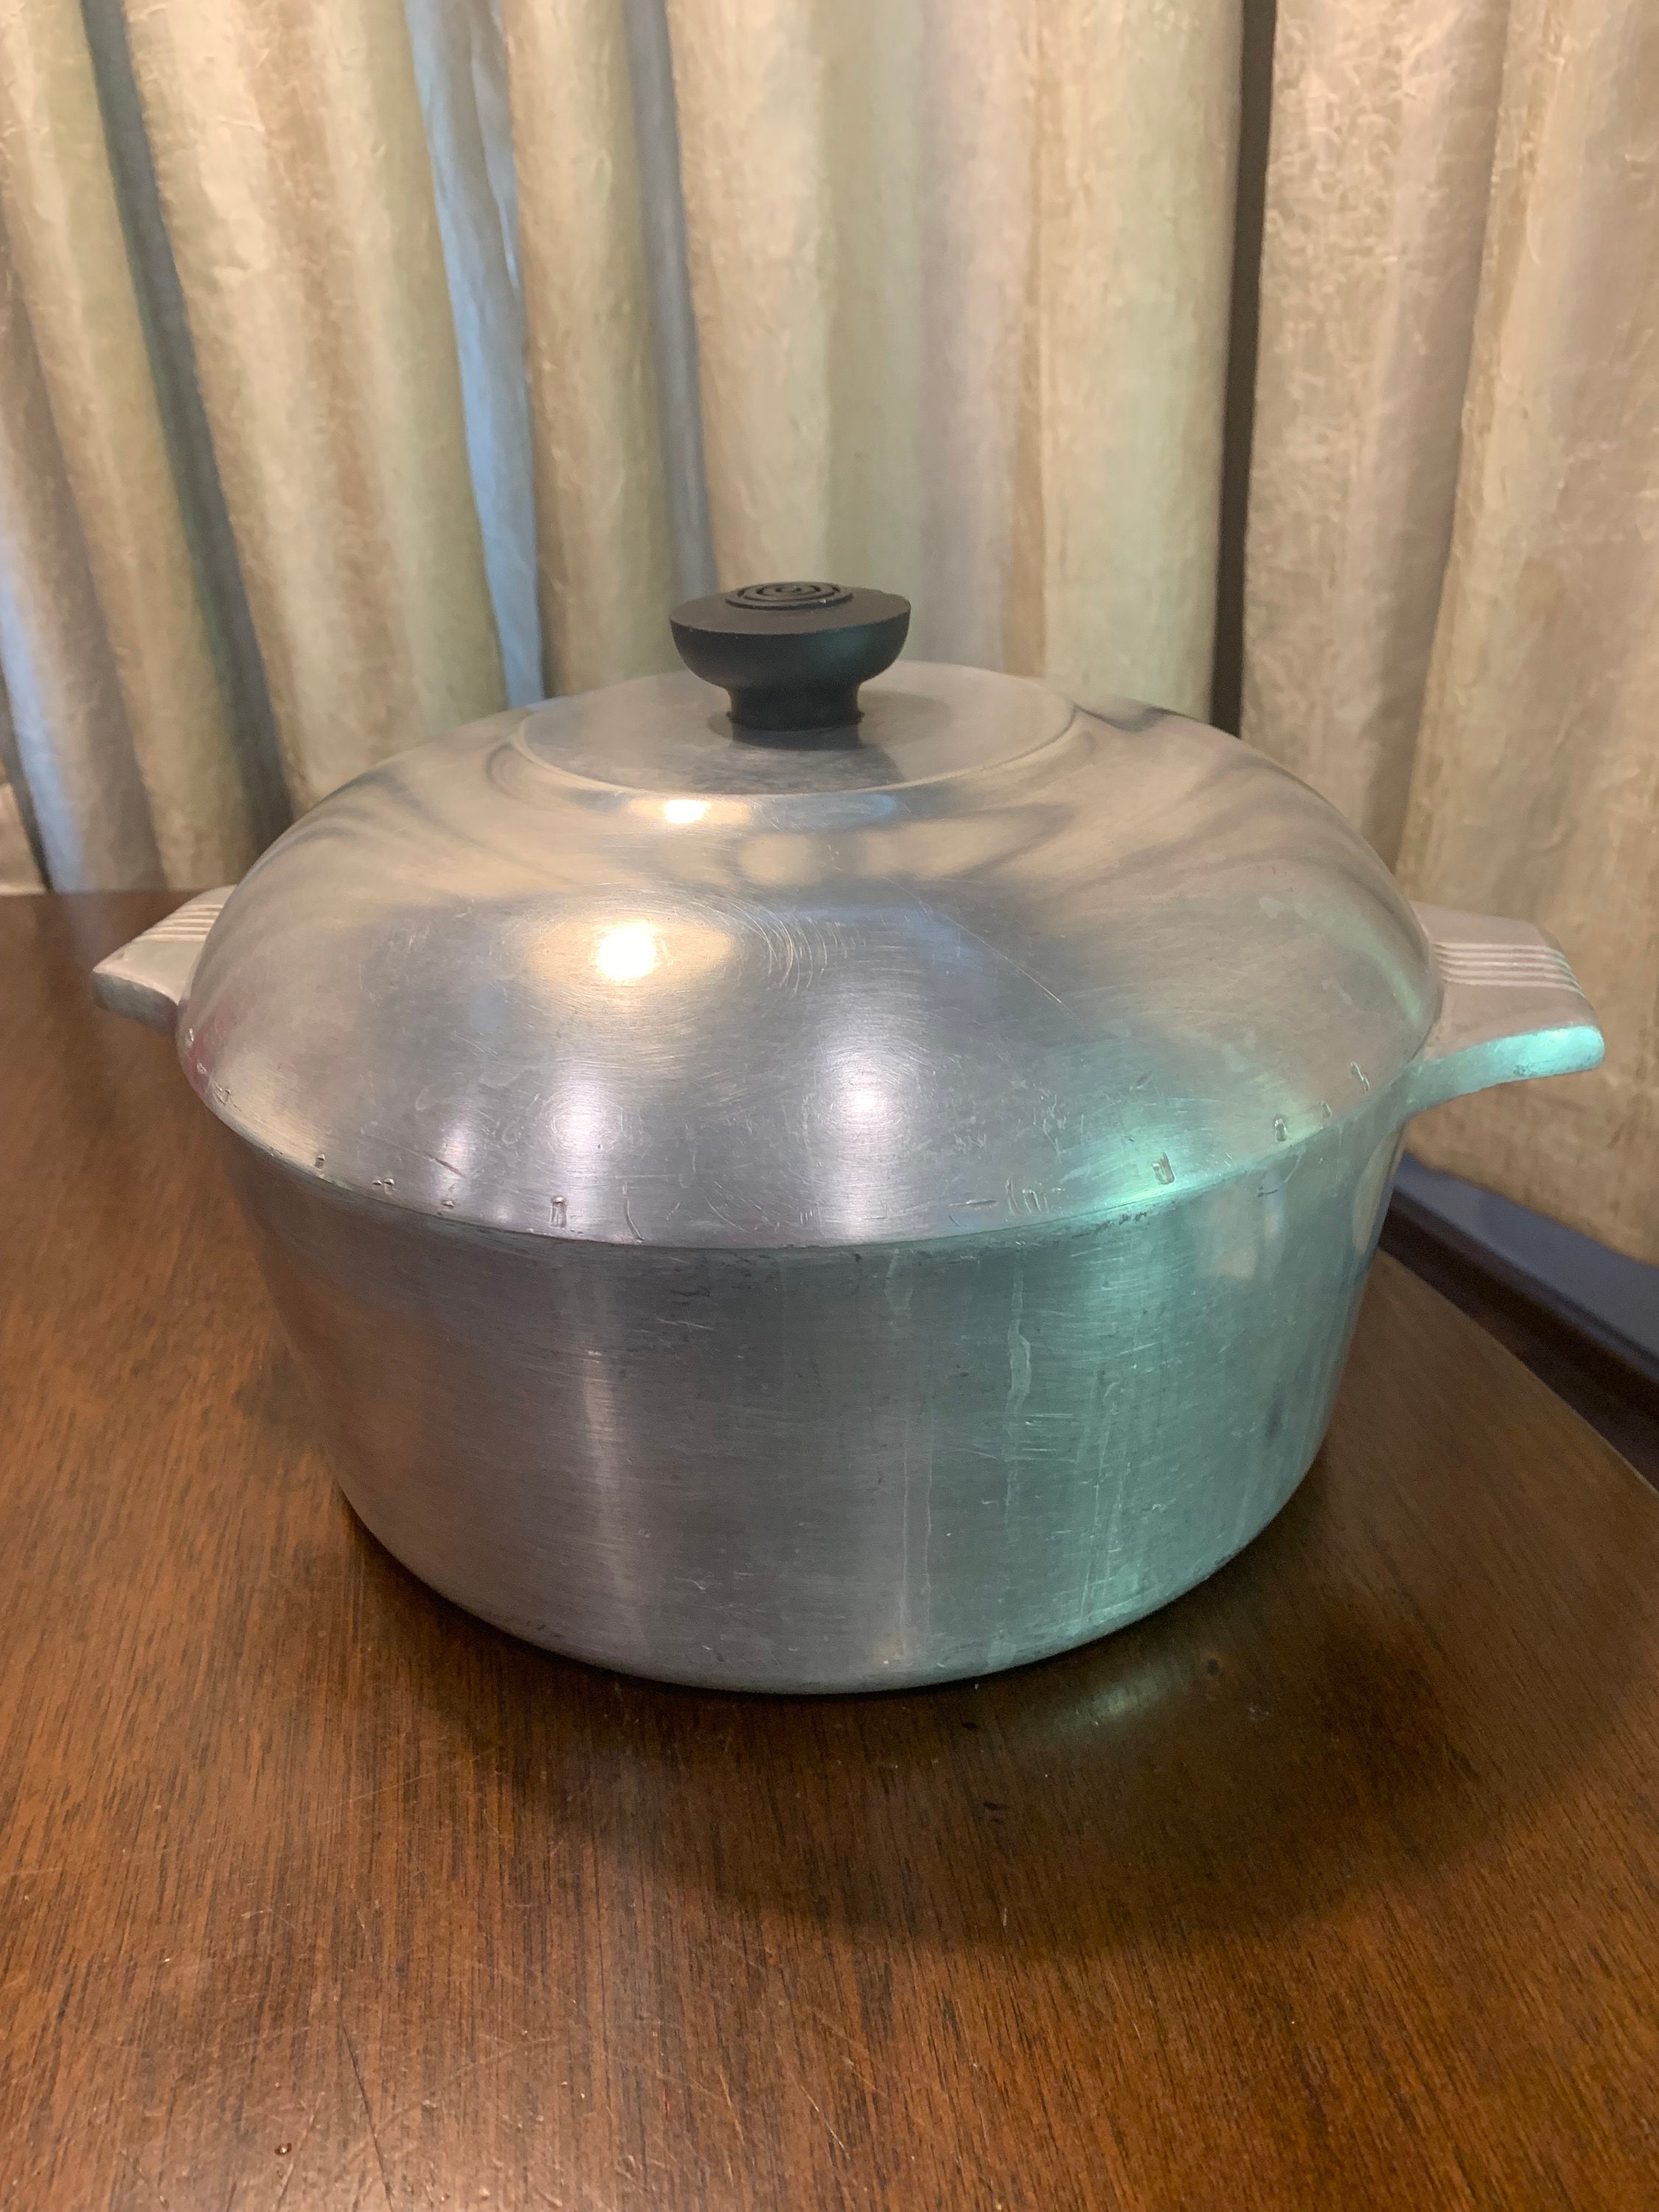 Wagner Ware Magnalite Cookware Including 13 Quart Roaster, Super Maid  Roaster and More